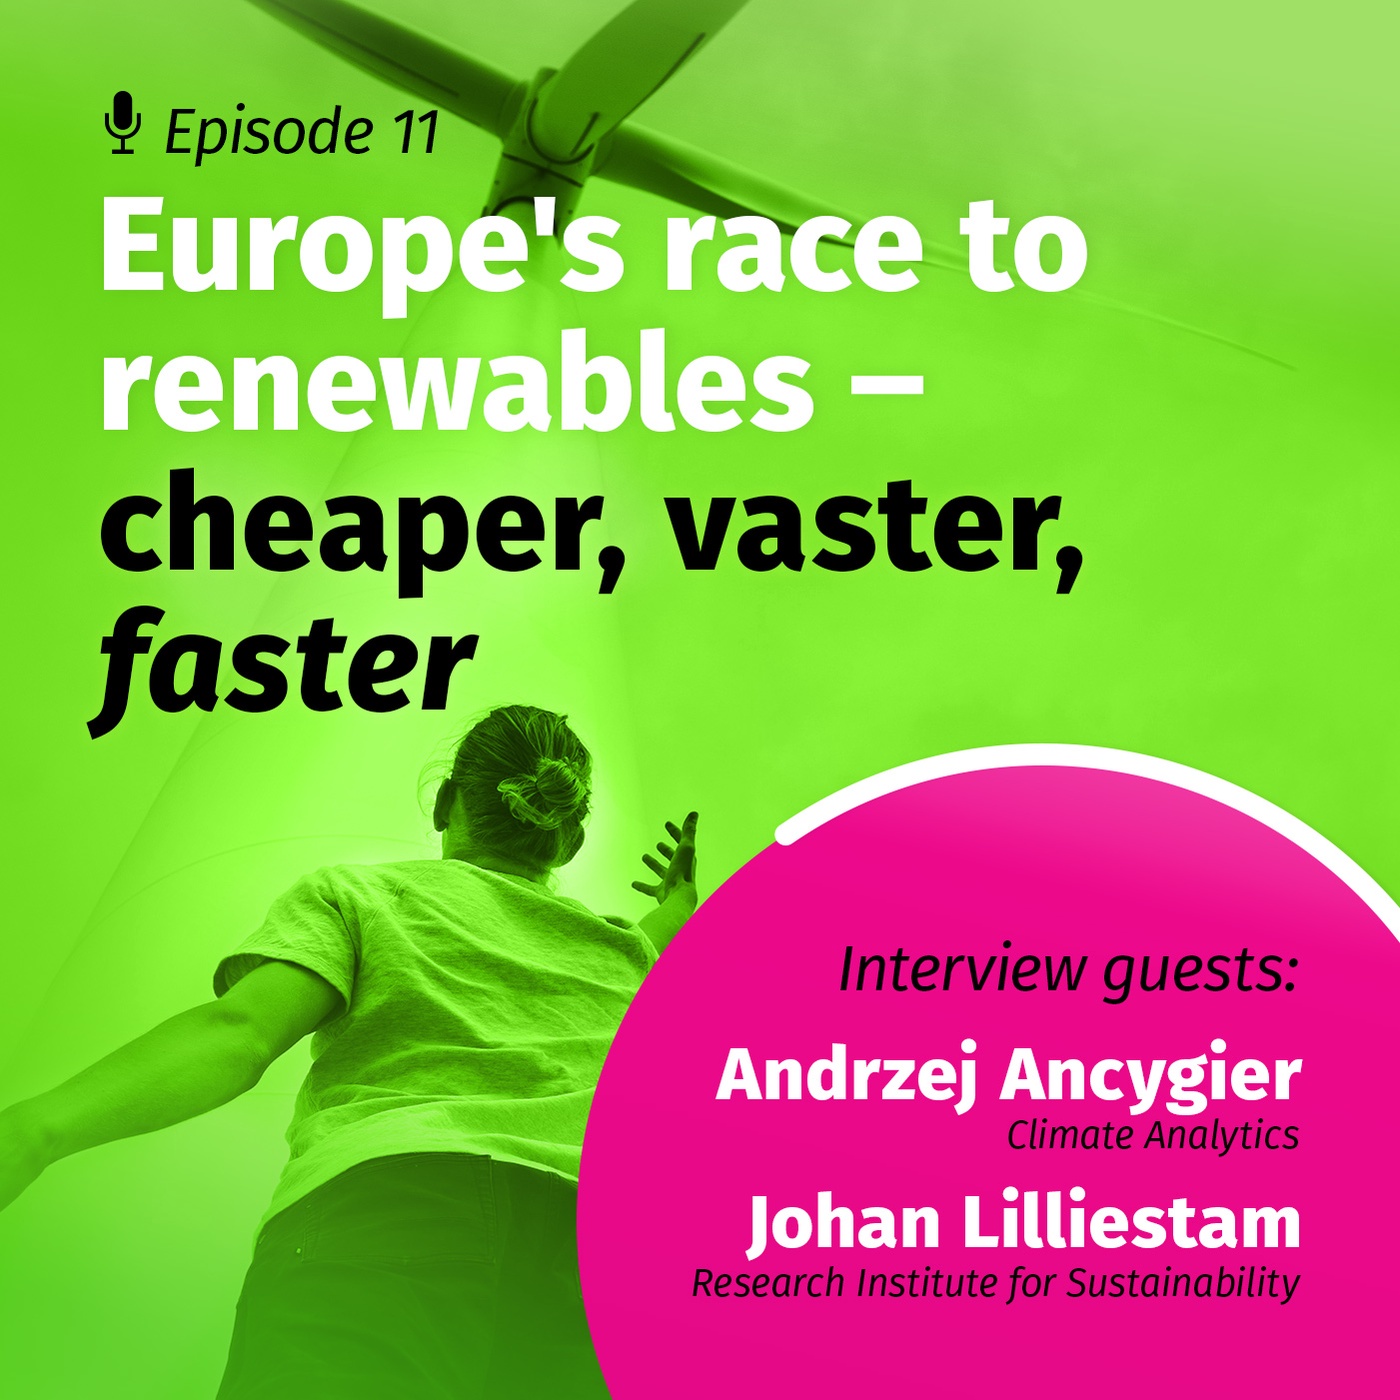 Europe's race to renewables - cheaper, vaster faster